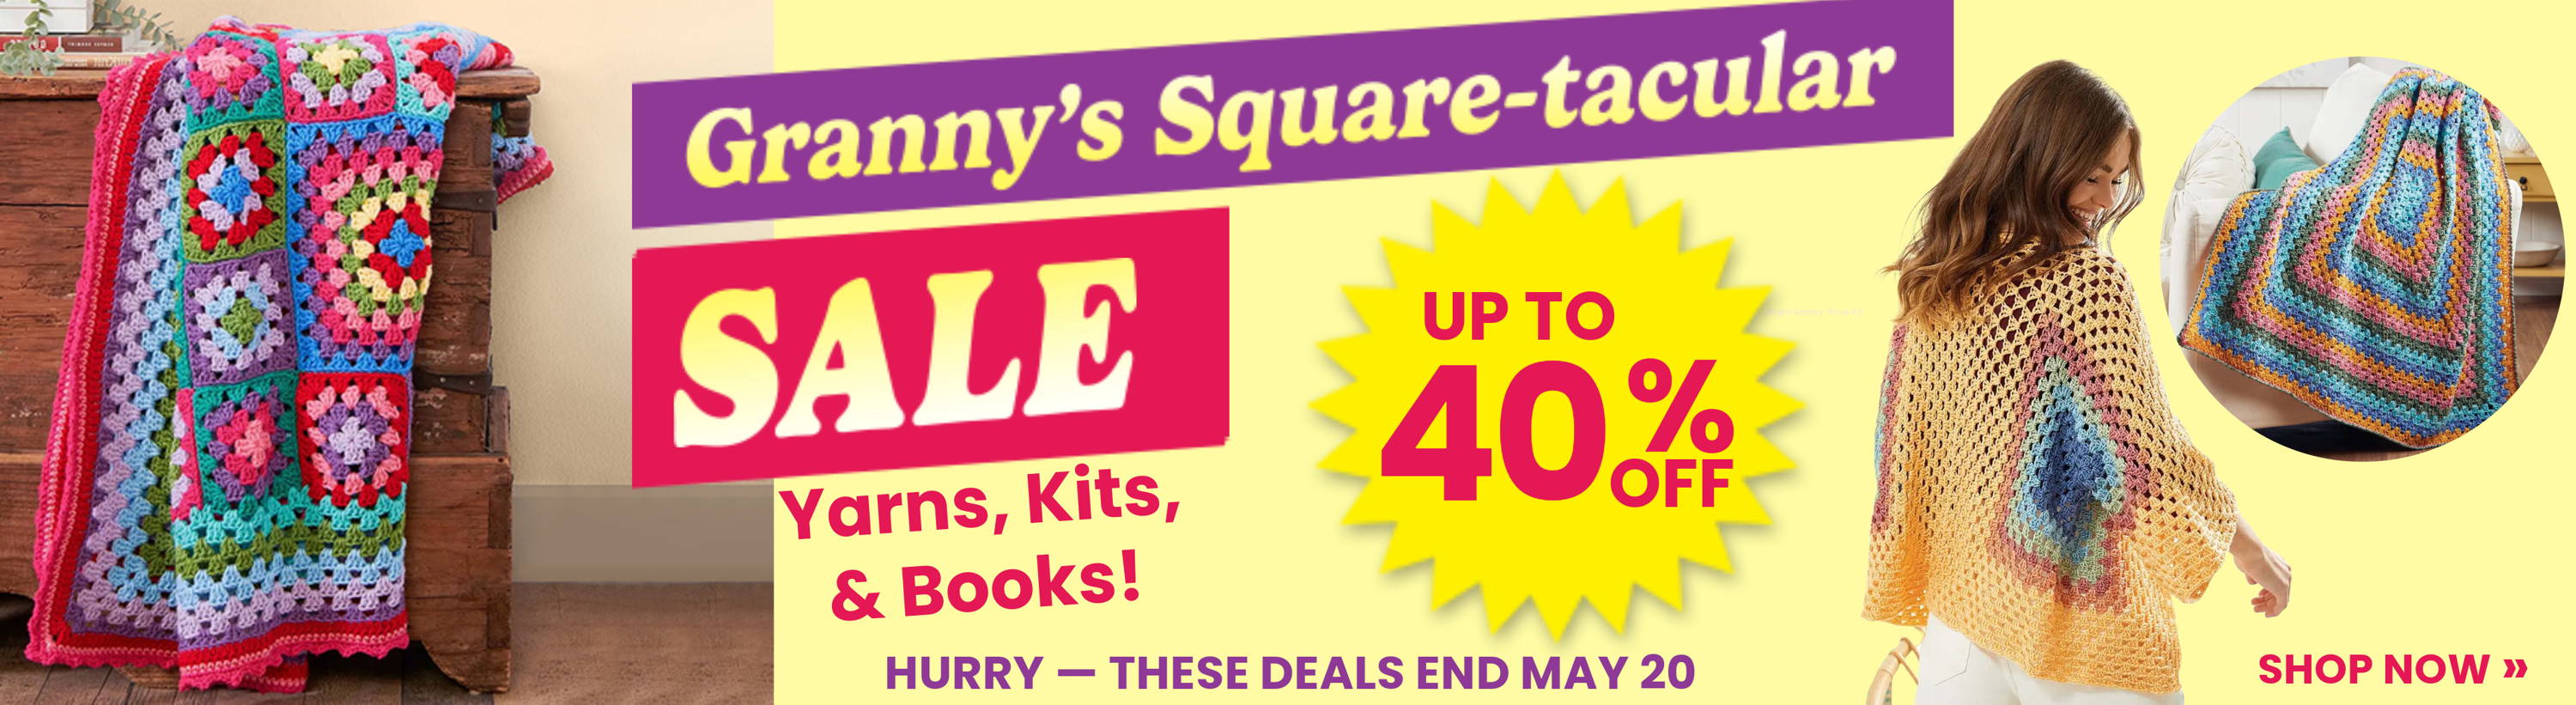 Granny's Square-tacular Sale - Up to 40% off Yarns, Kits, and Books until May 20. Image: featured granny square projects